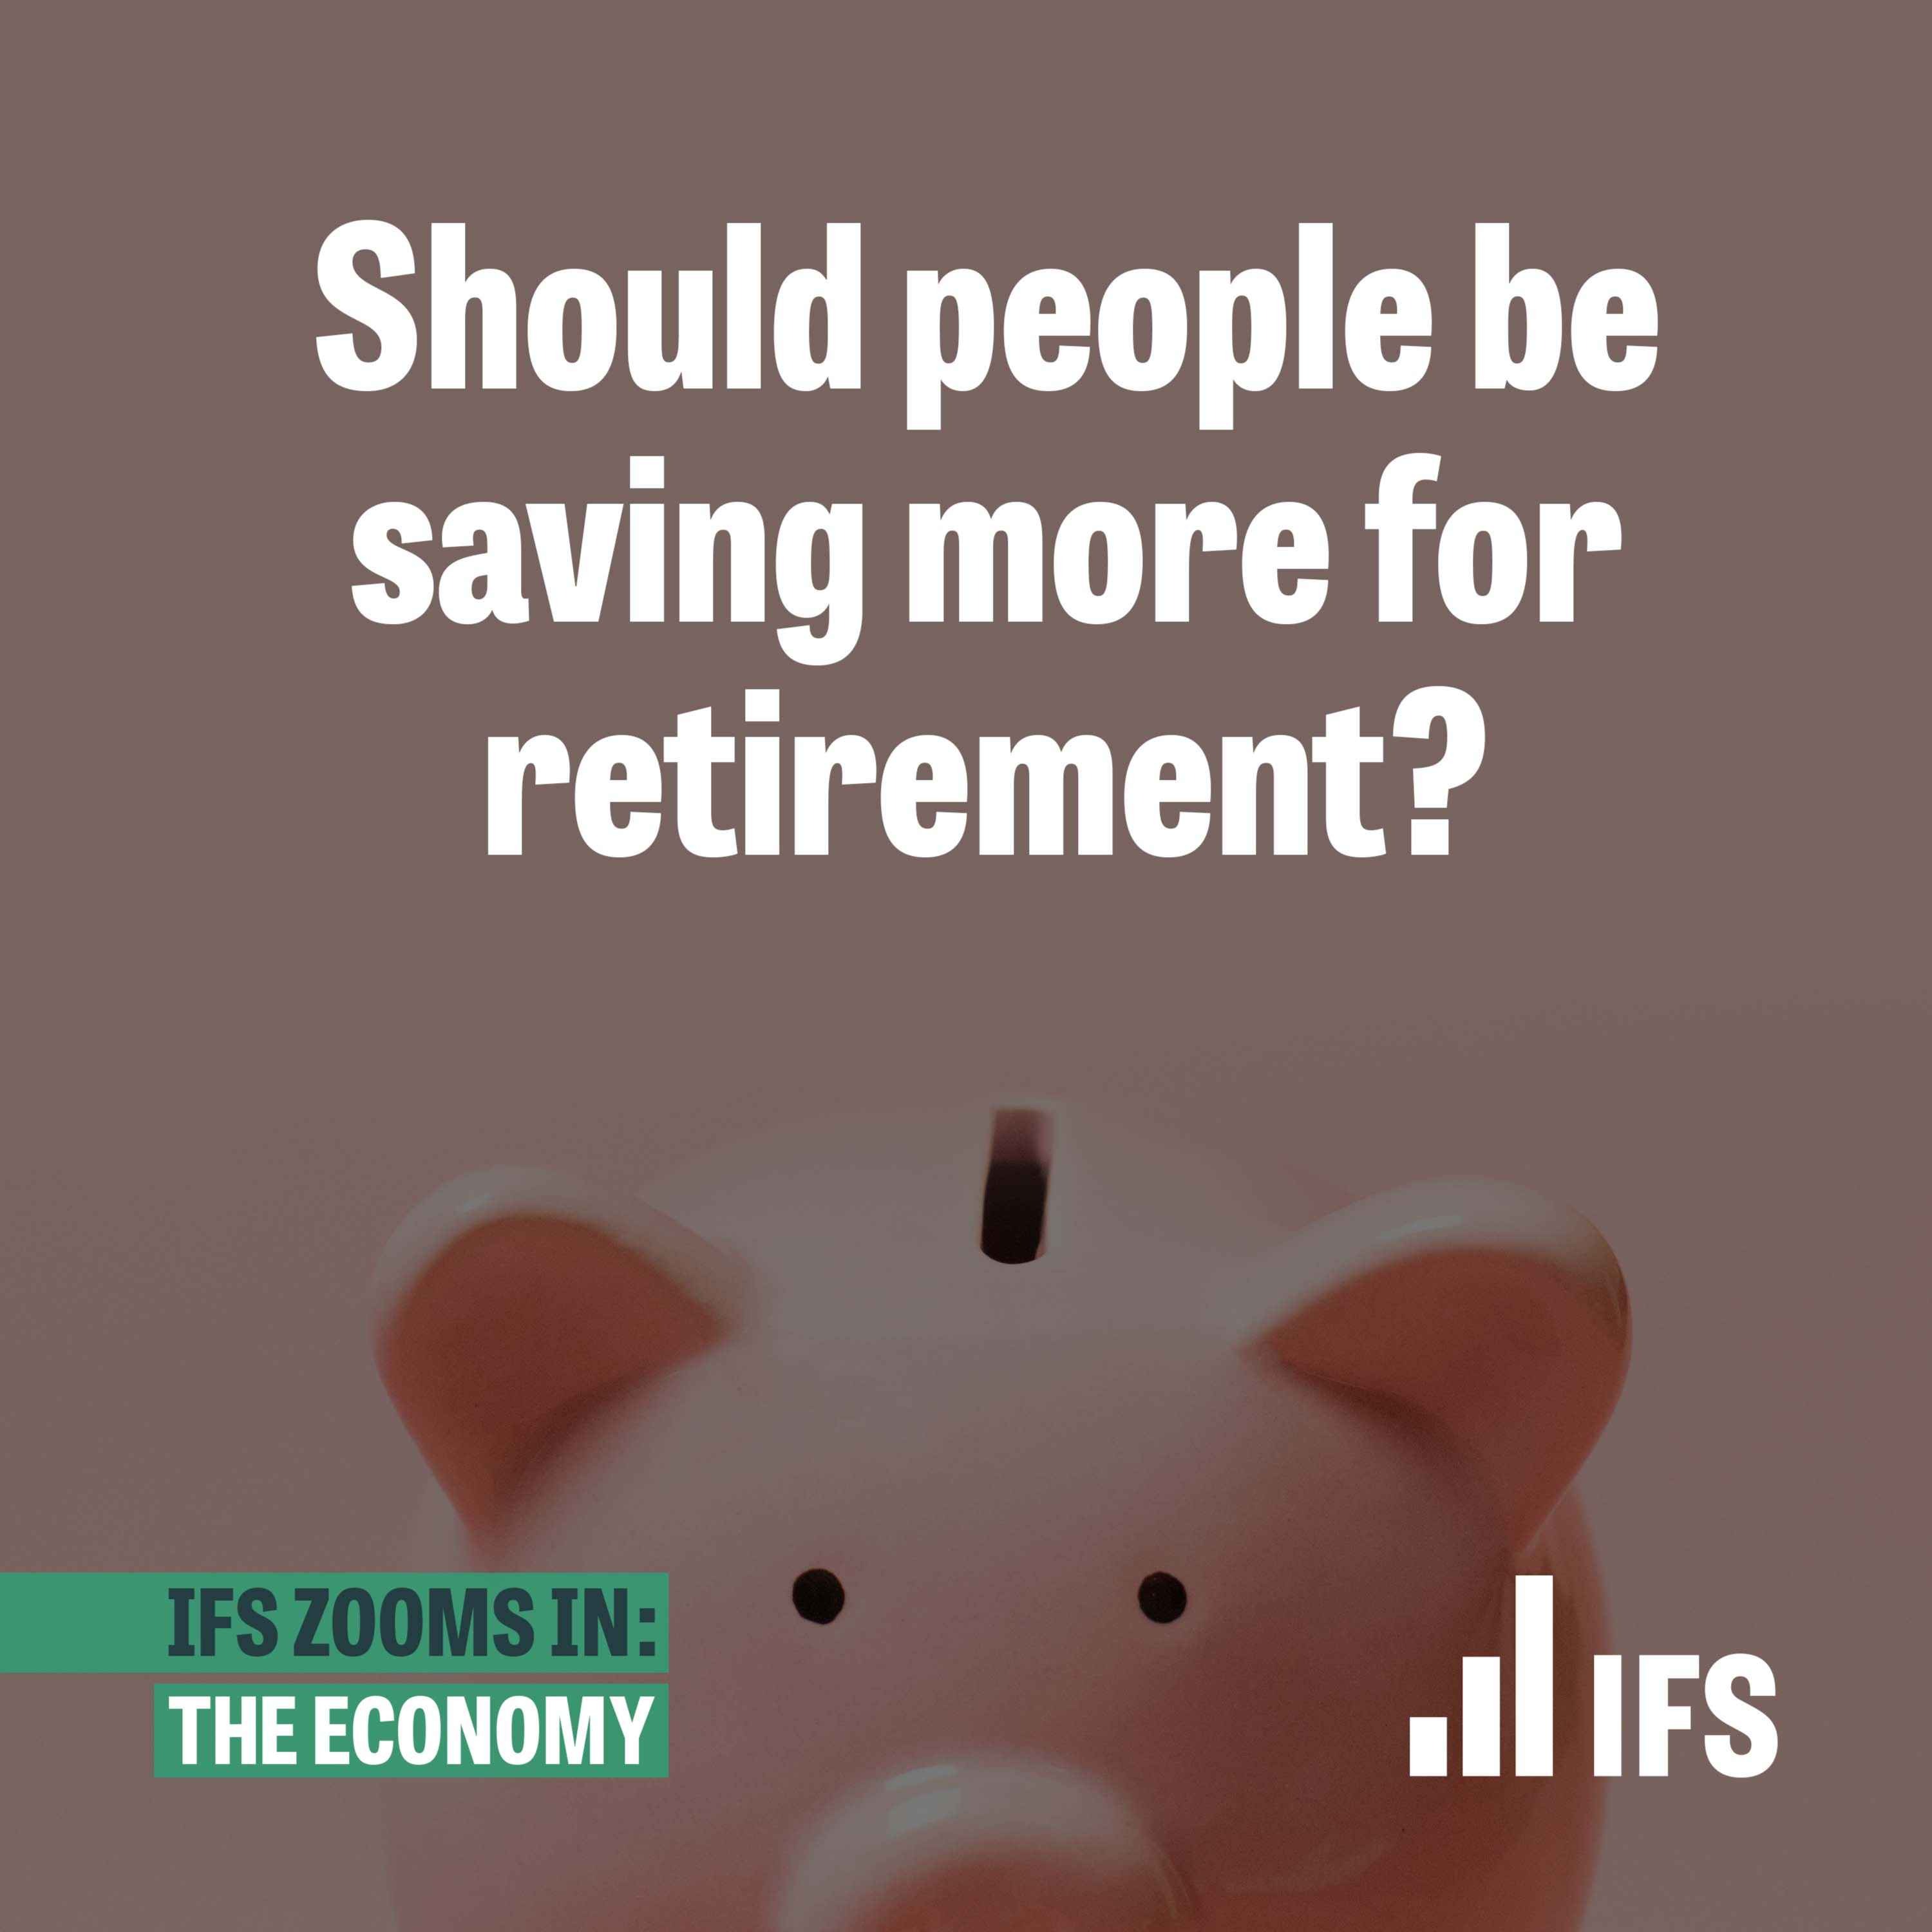 Should people be saving more for retirement?